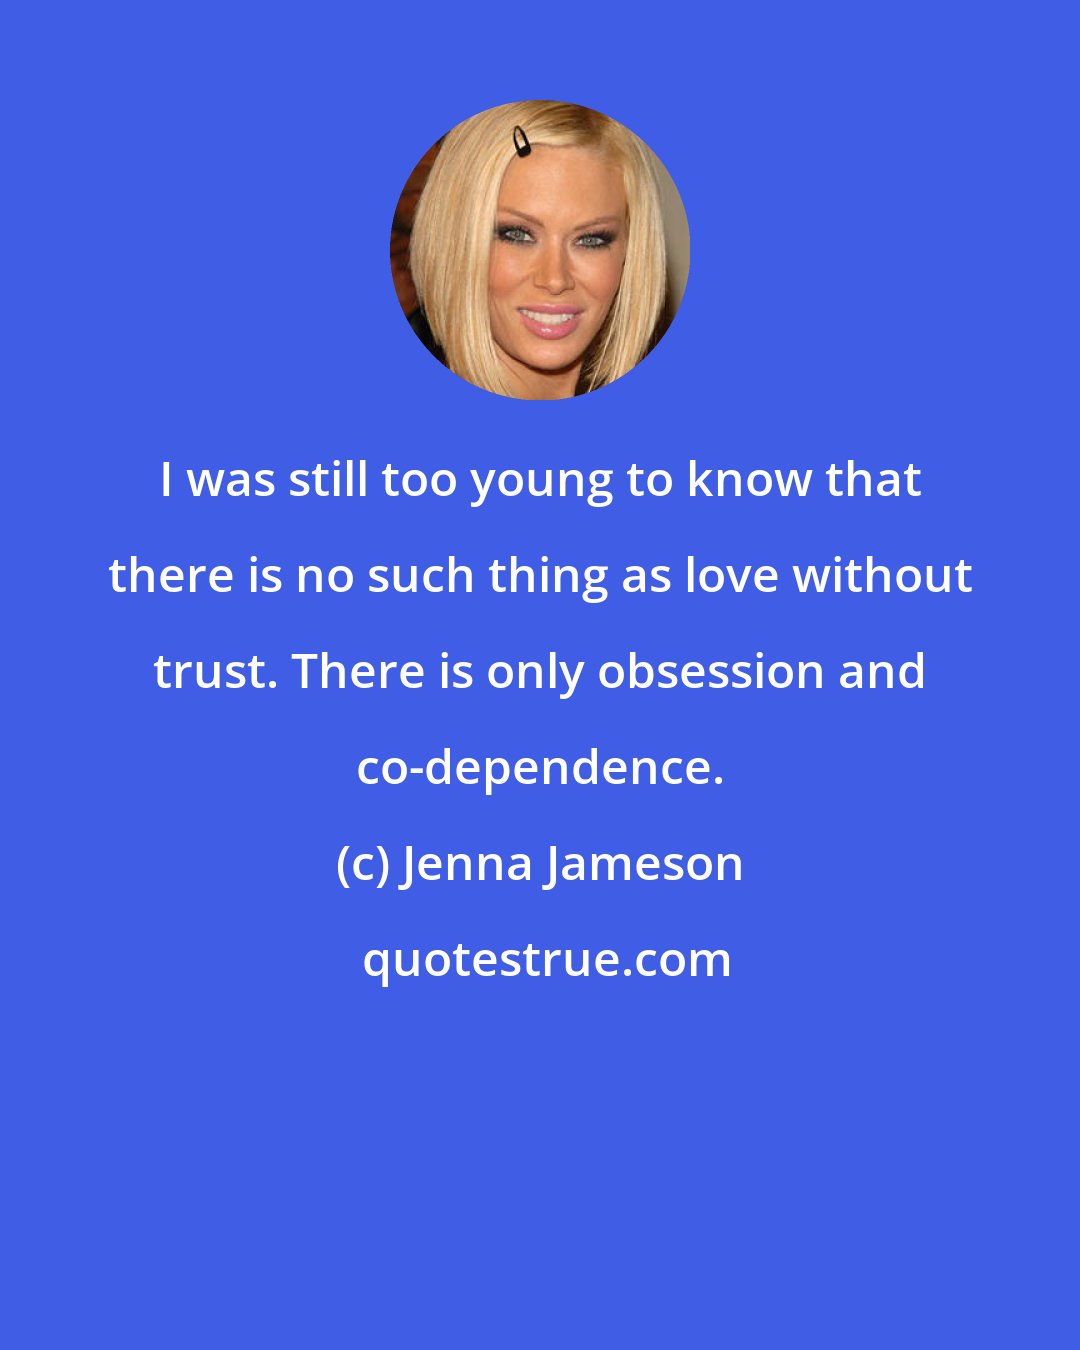 Jenna Jameson: I was still too young to know that there is no such thing as love without trust. There is only obsession and co-dependence.